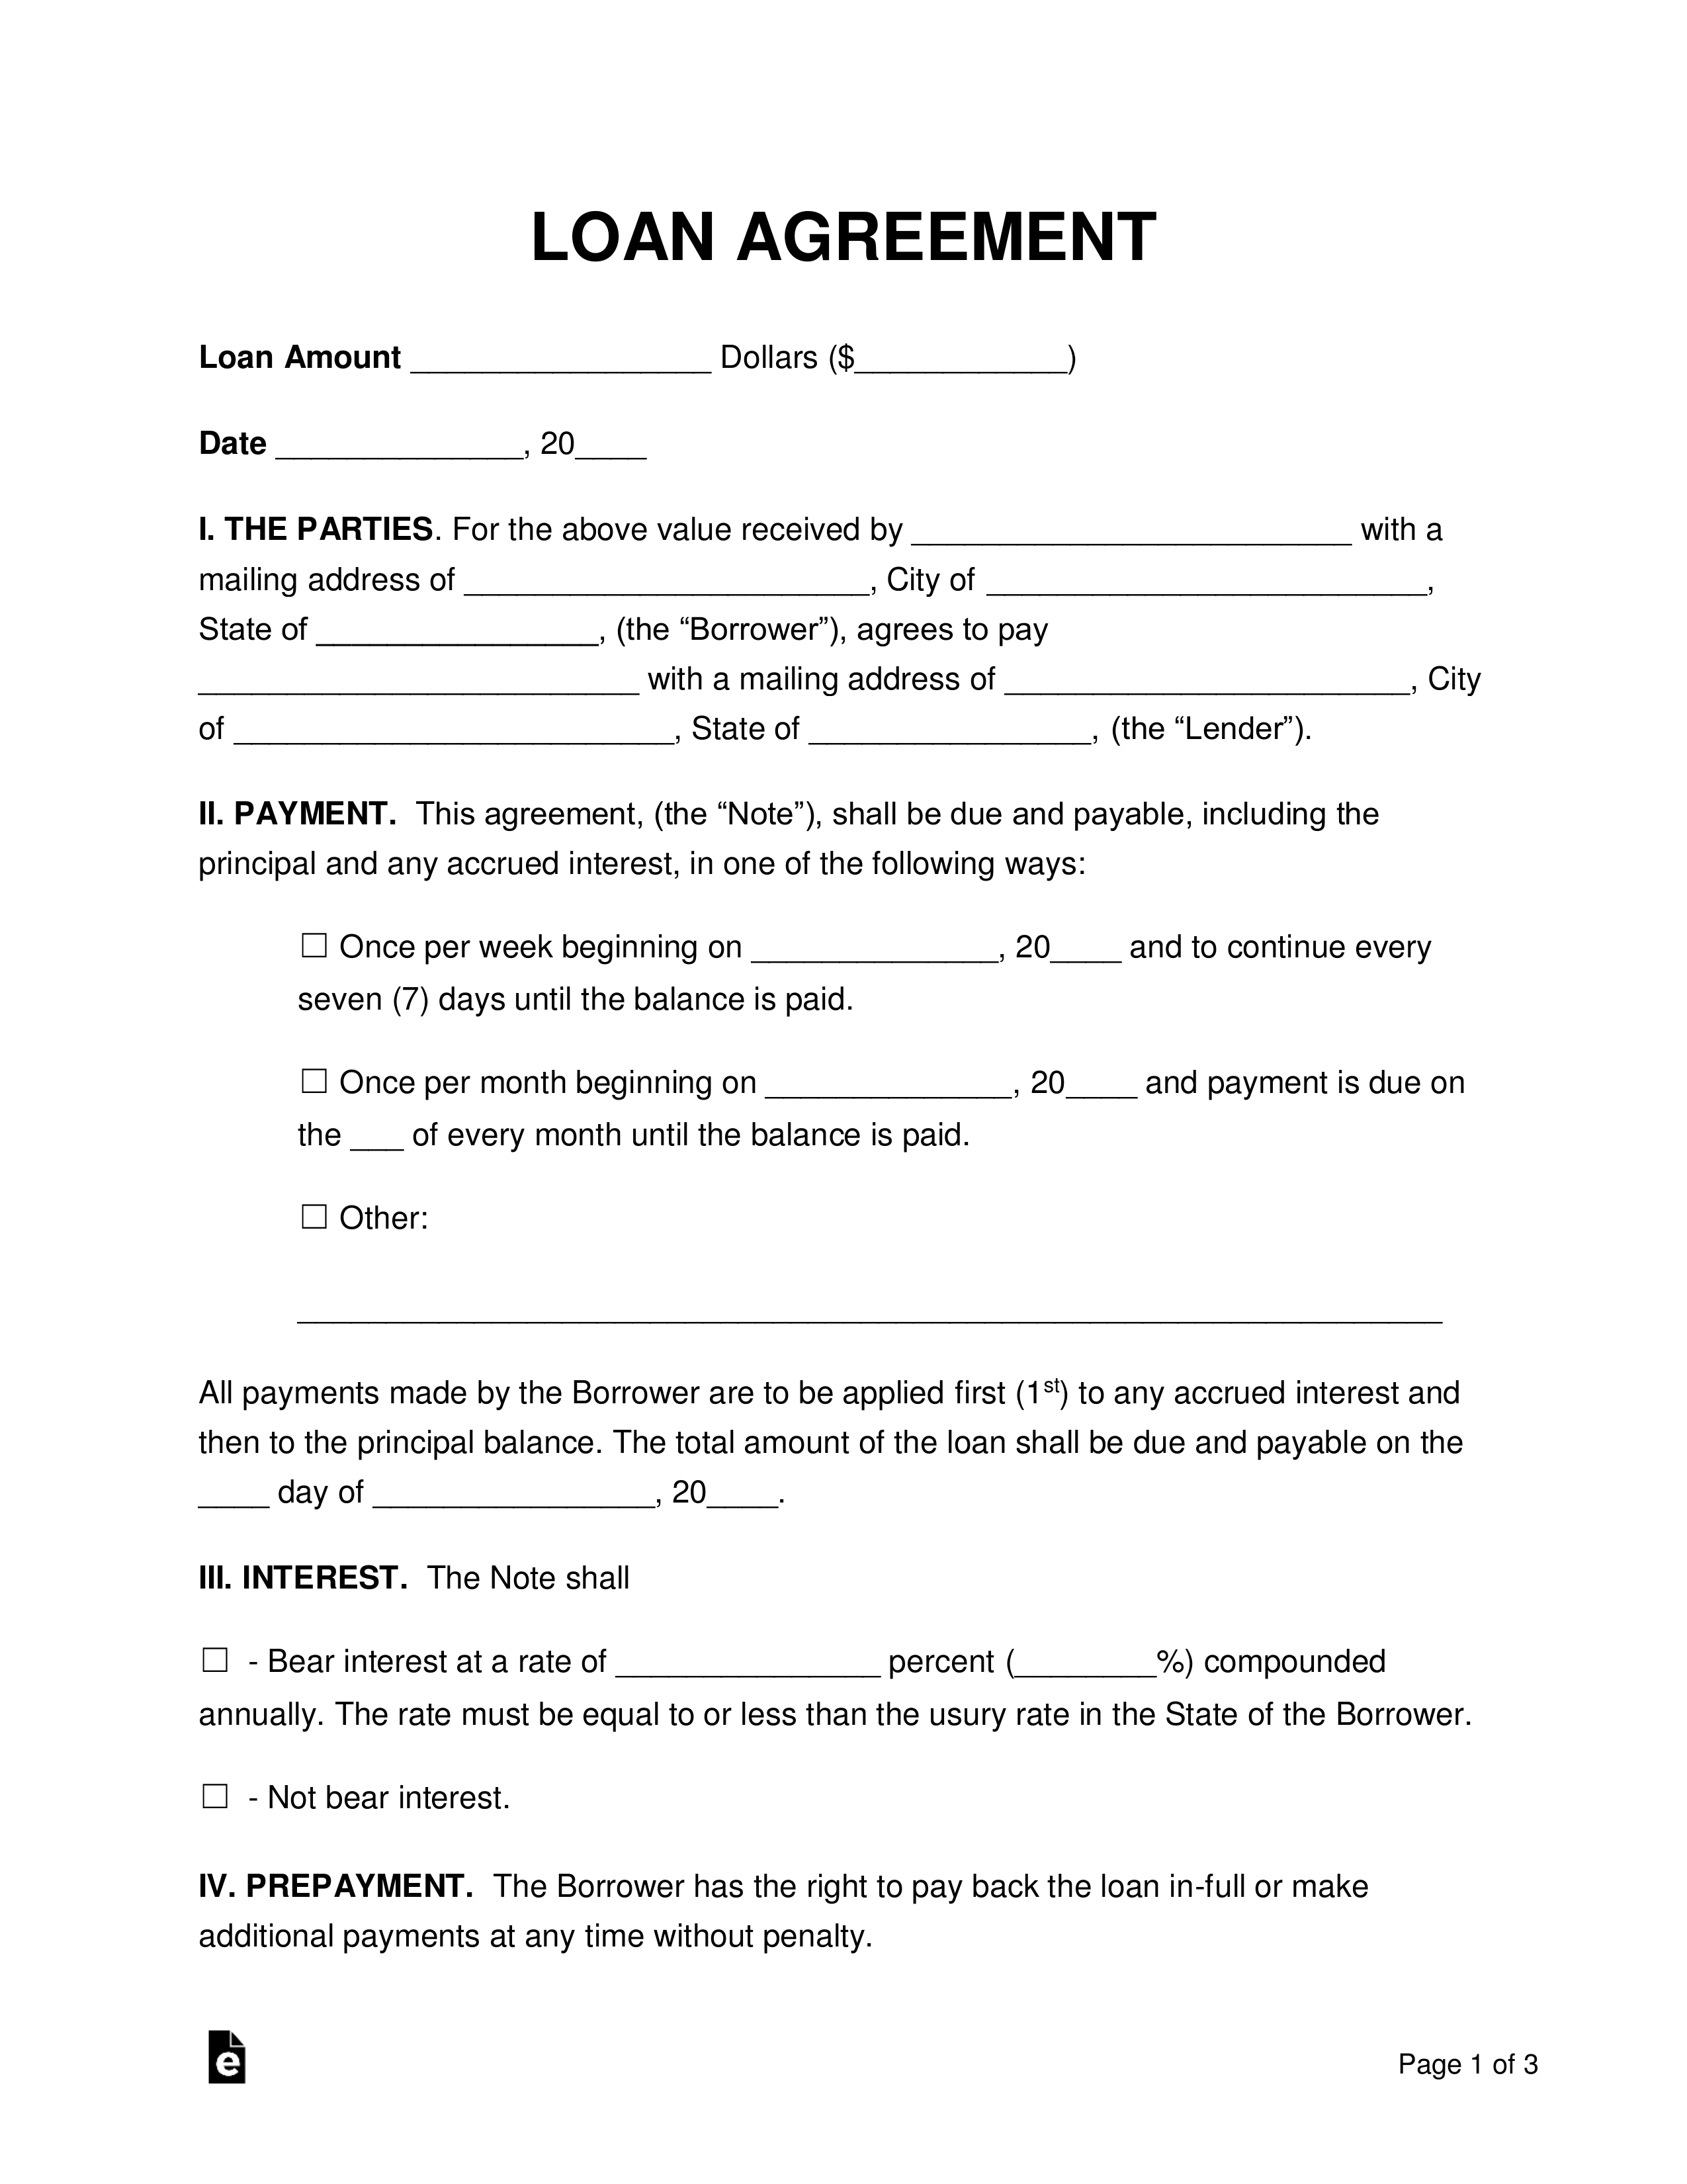 Free Loan Agreement Templates - Pdf | Word | Eforms – Free In Blank Loan Agreement Template